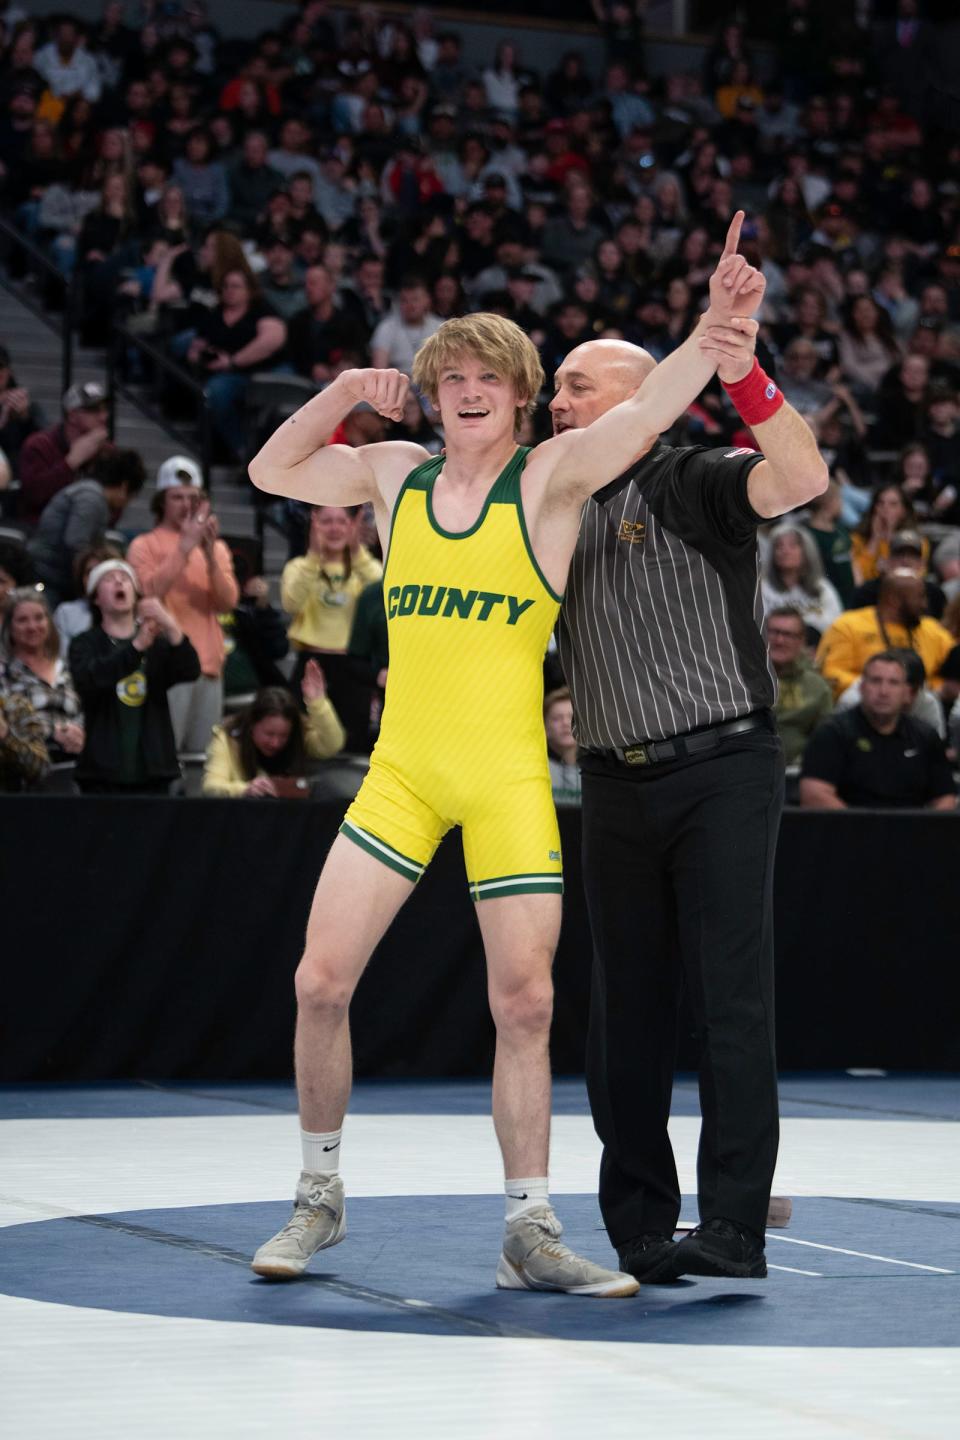 Pueblo County's Boden White has his hand raised as the winner of the 138-pound championship match of the Class 4A state wrestling tournament at Ball Arena on Saturday.